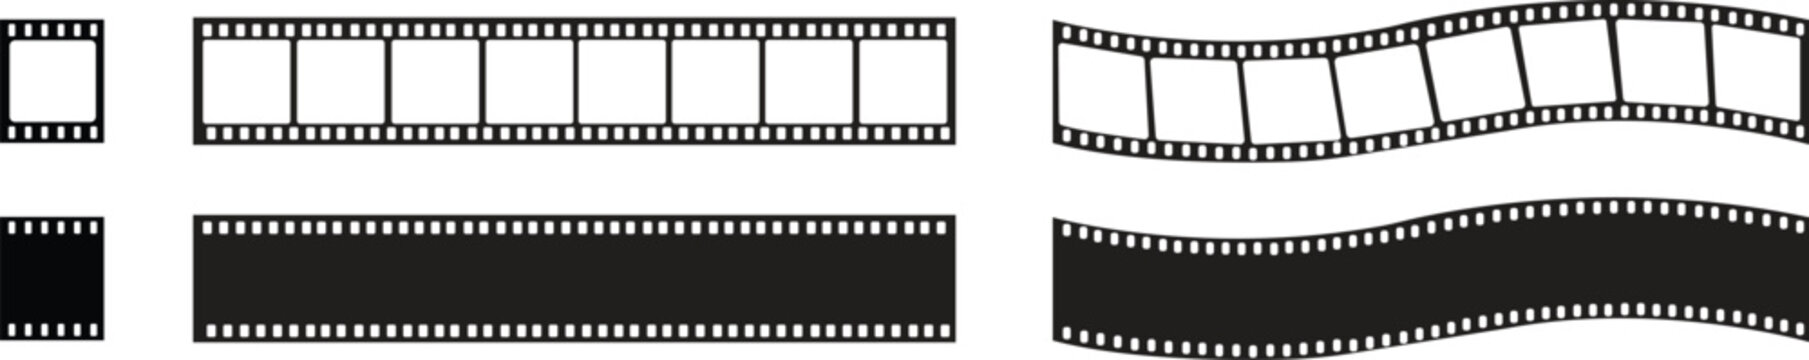 Set of Film Strips icons in fill styles. Movie Film with Film roll. Black photogram vectors designs can be used for mobile apps and web. Filmstrip photographer equipment on transparent background.